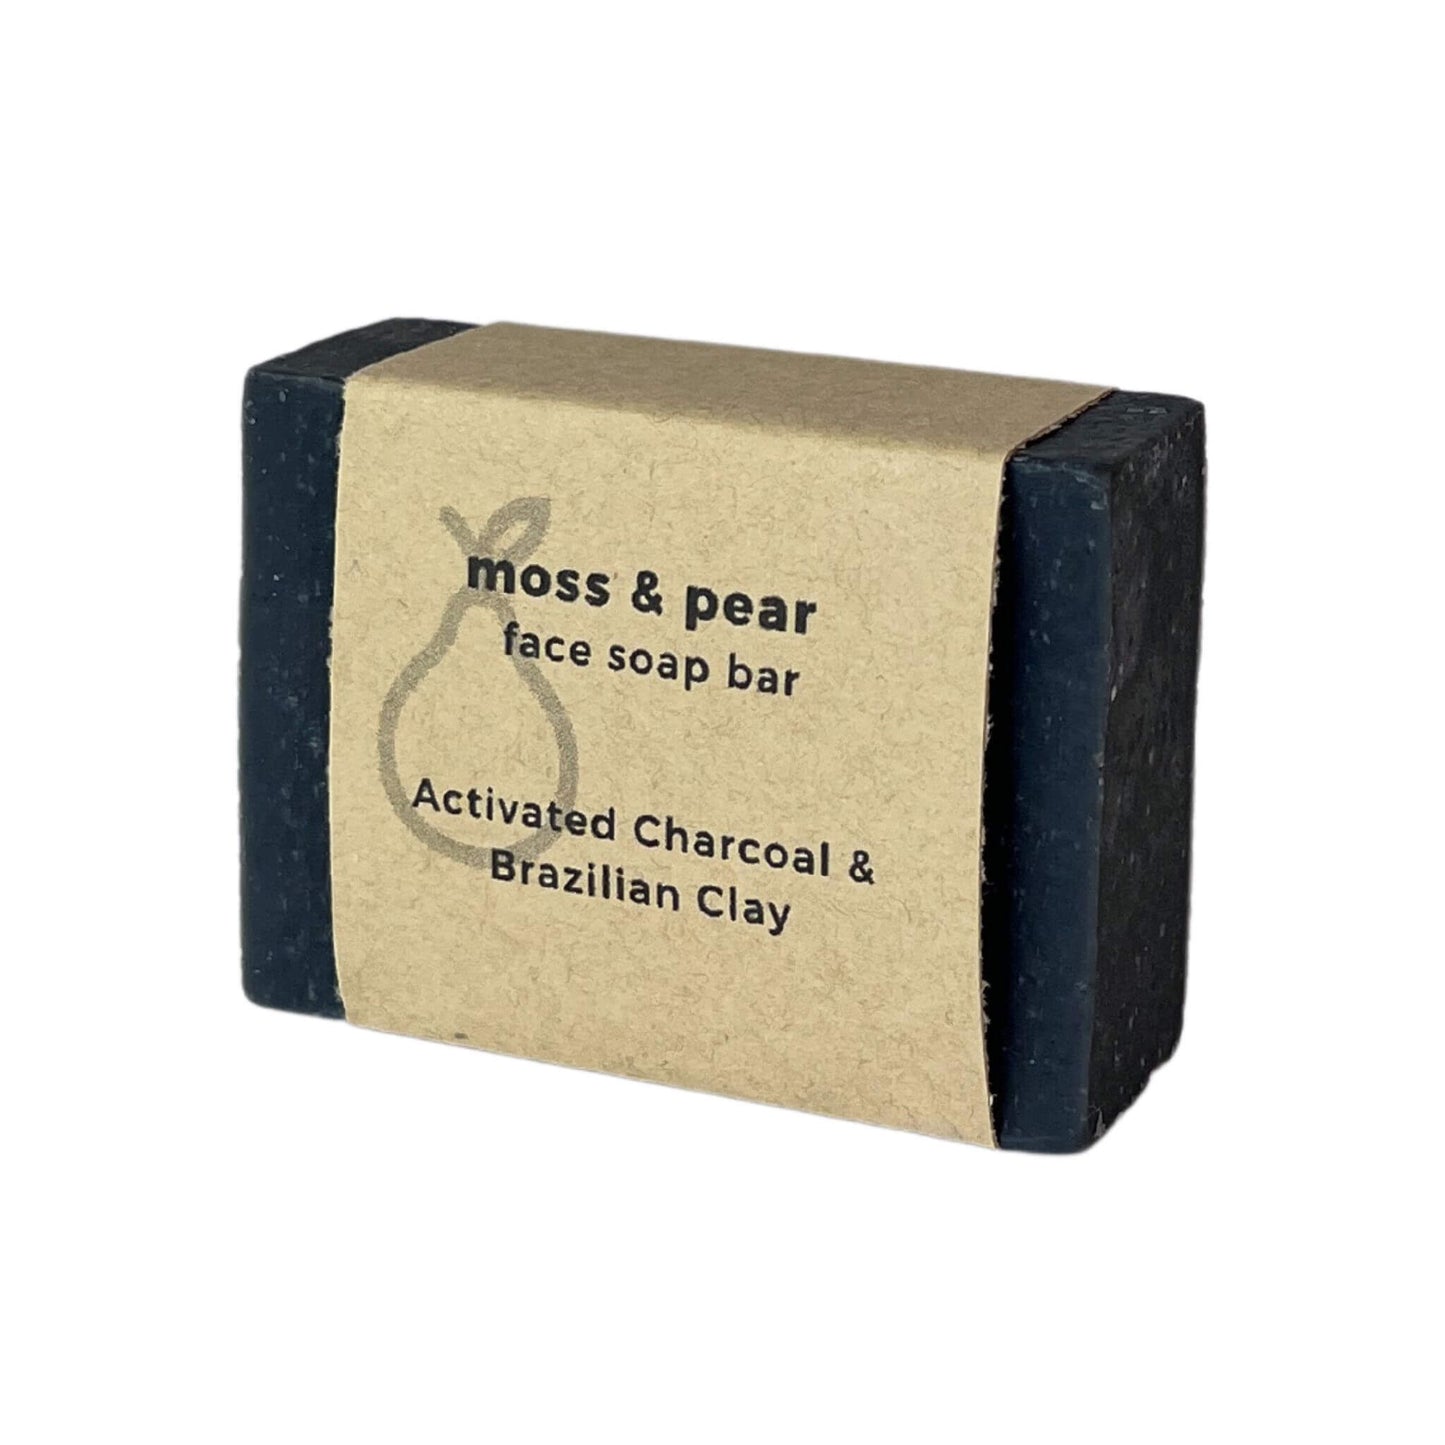 Face Soap Bar Activated Charcoal & Brazilian Clay with label